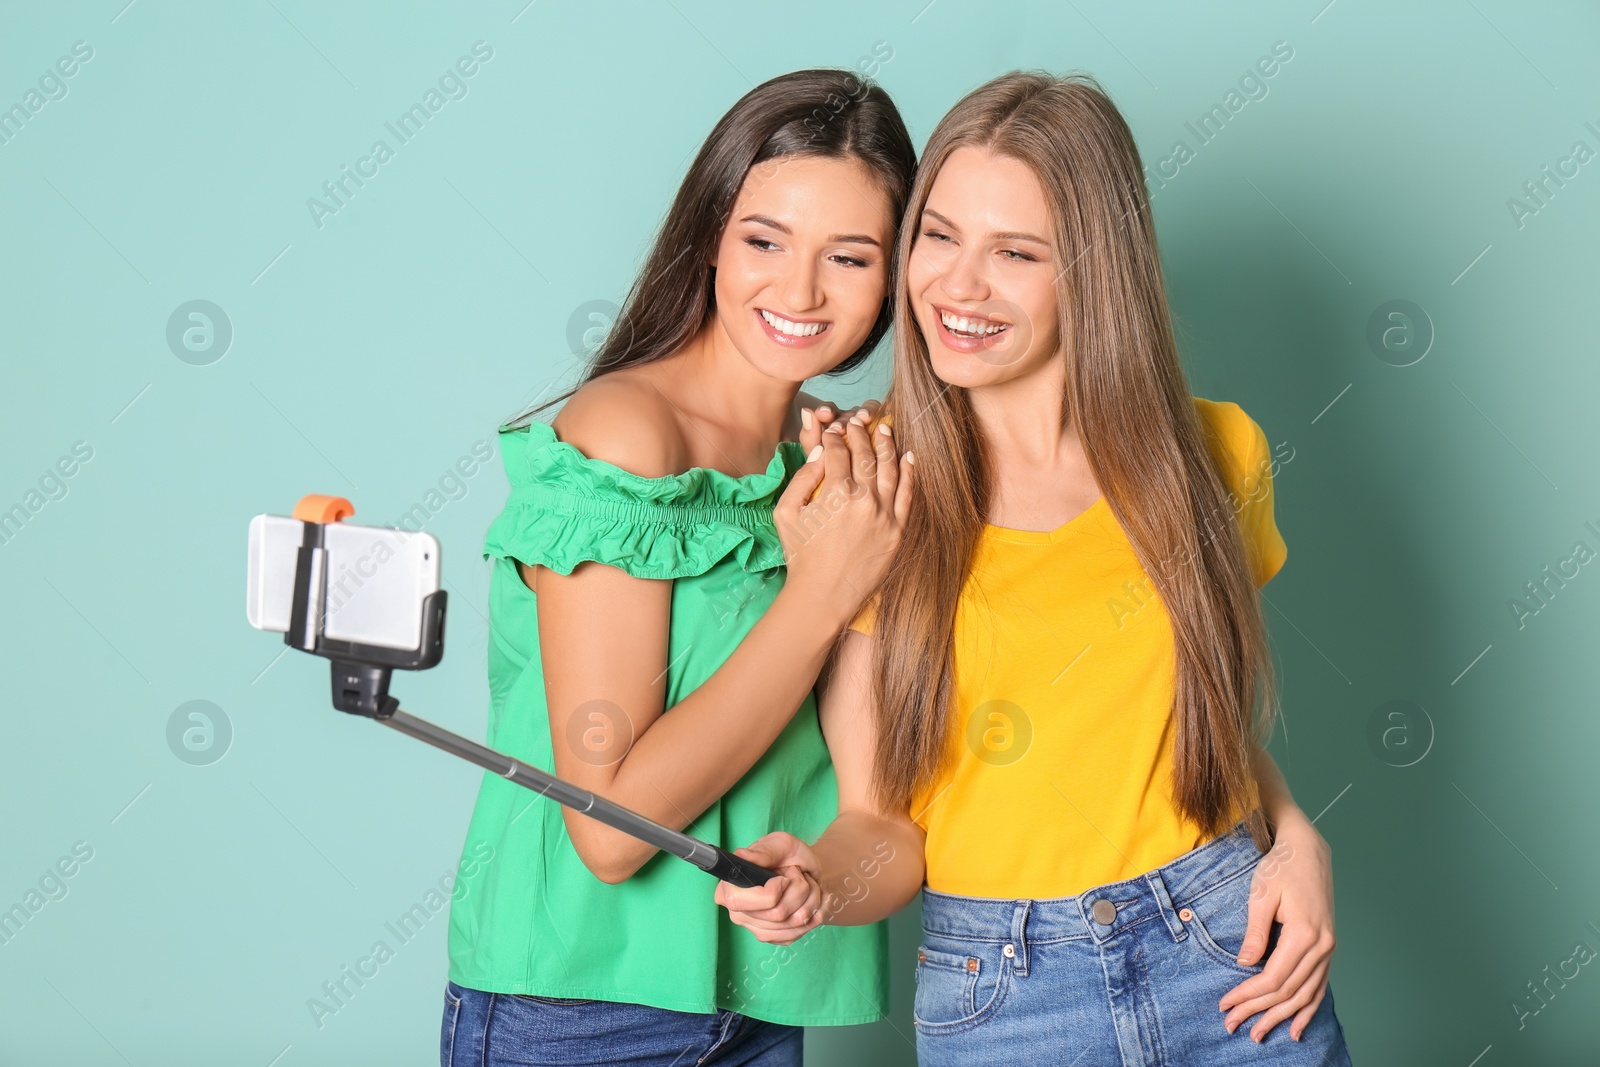 Photo of Young beautiful women taking selfie against color background